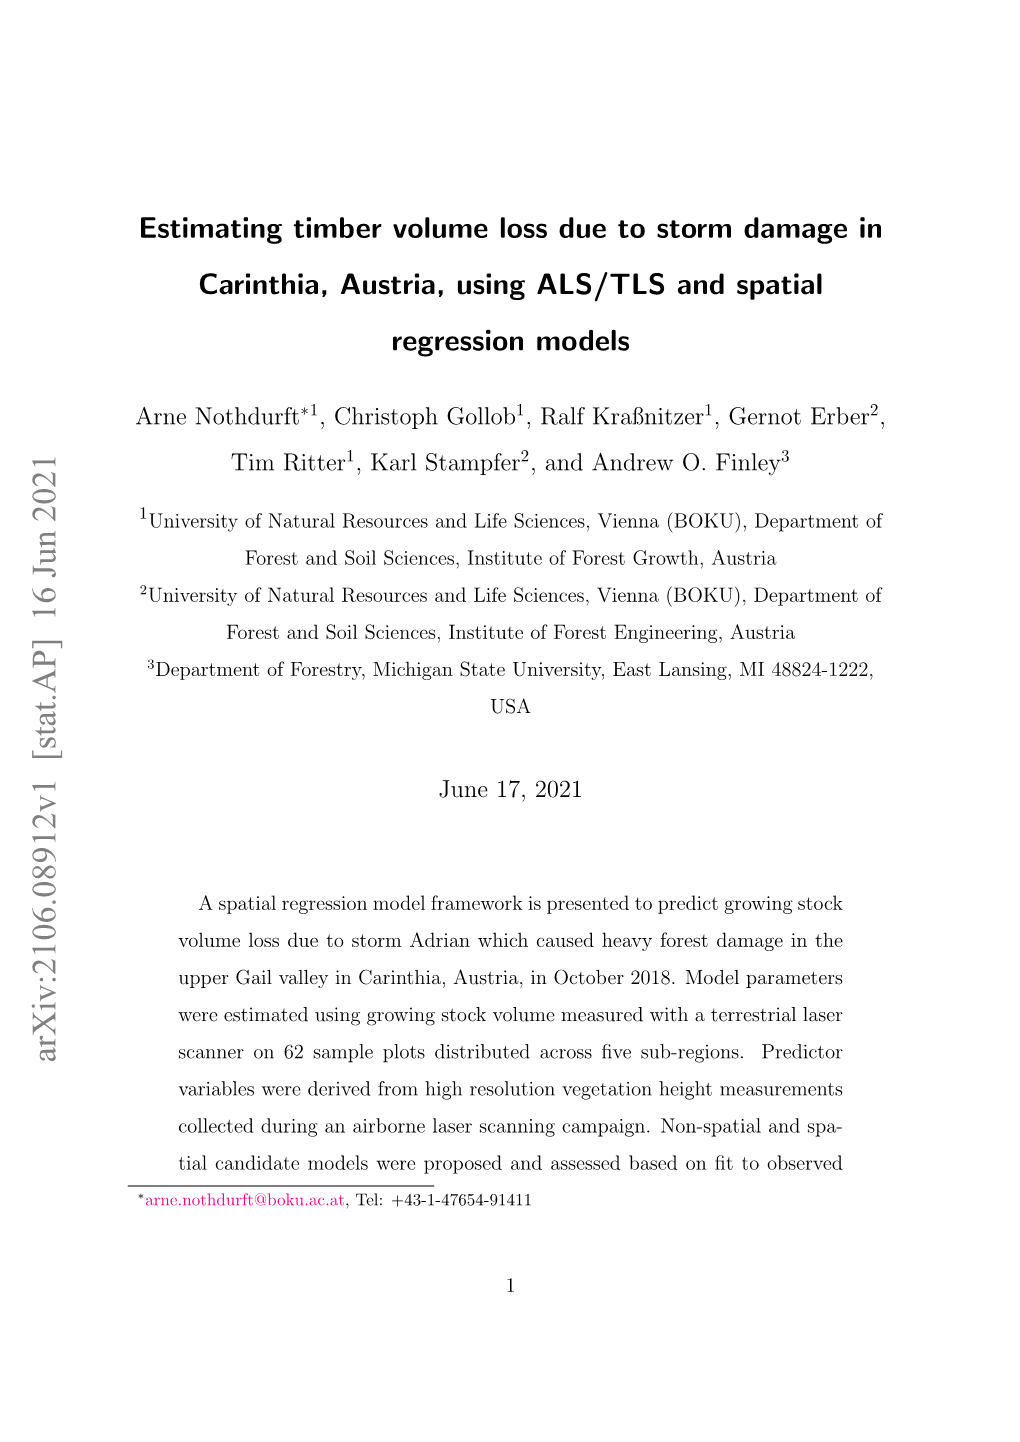 Estimating Timber Volume Loss Due to Storm Damage in Carinthia, Austria, Using ALS/TLS and Spatial Regression Models